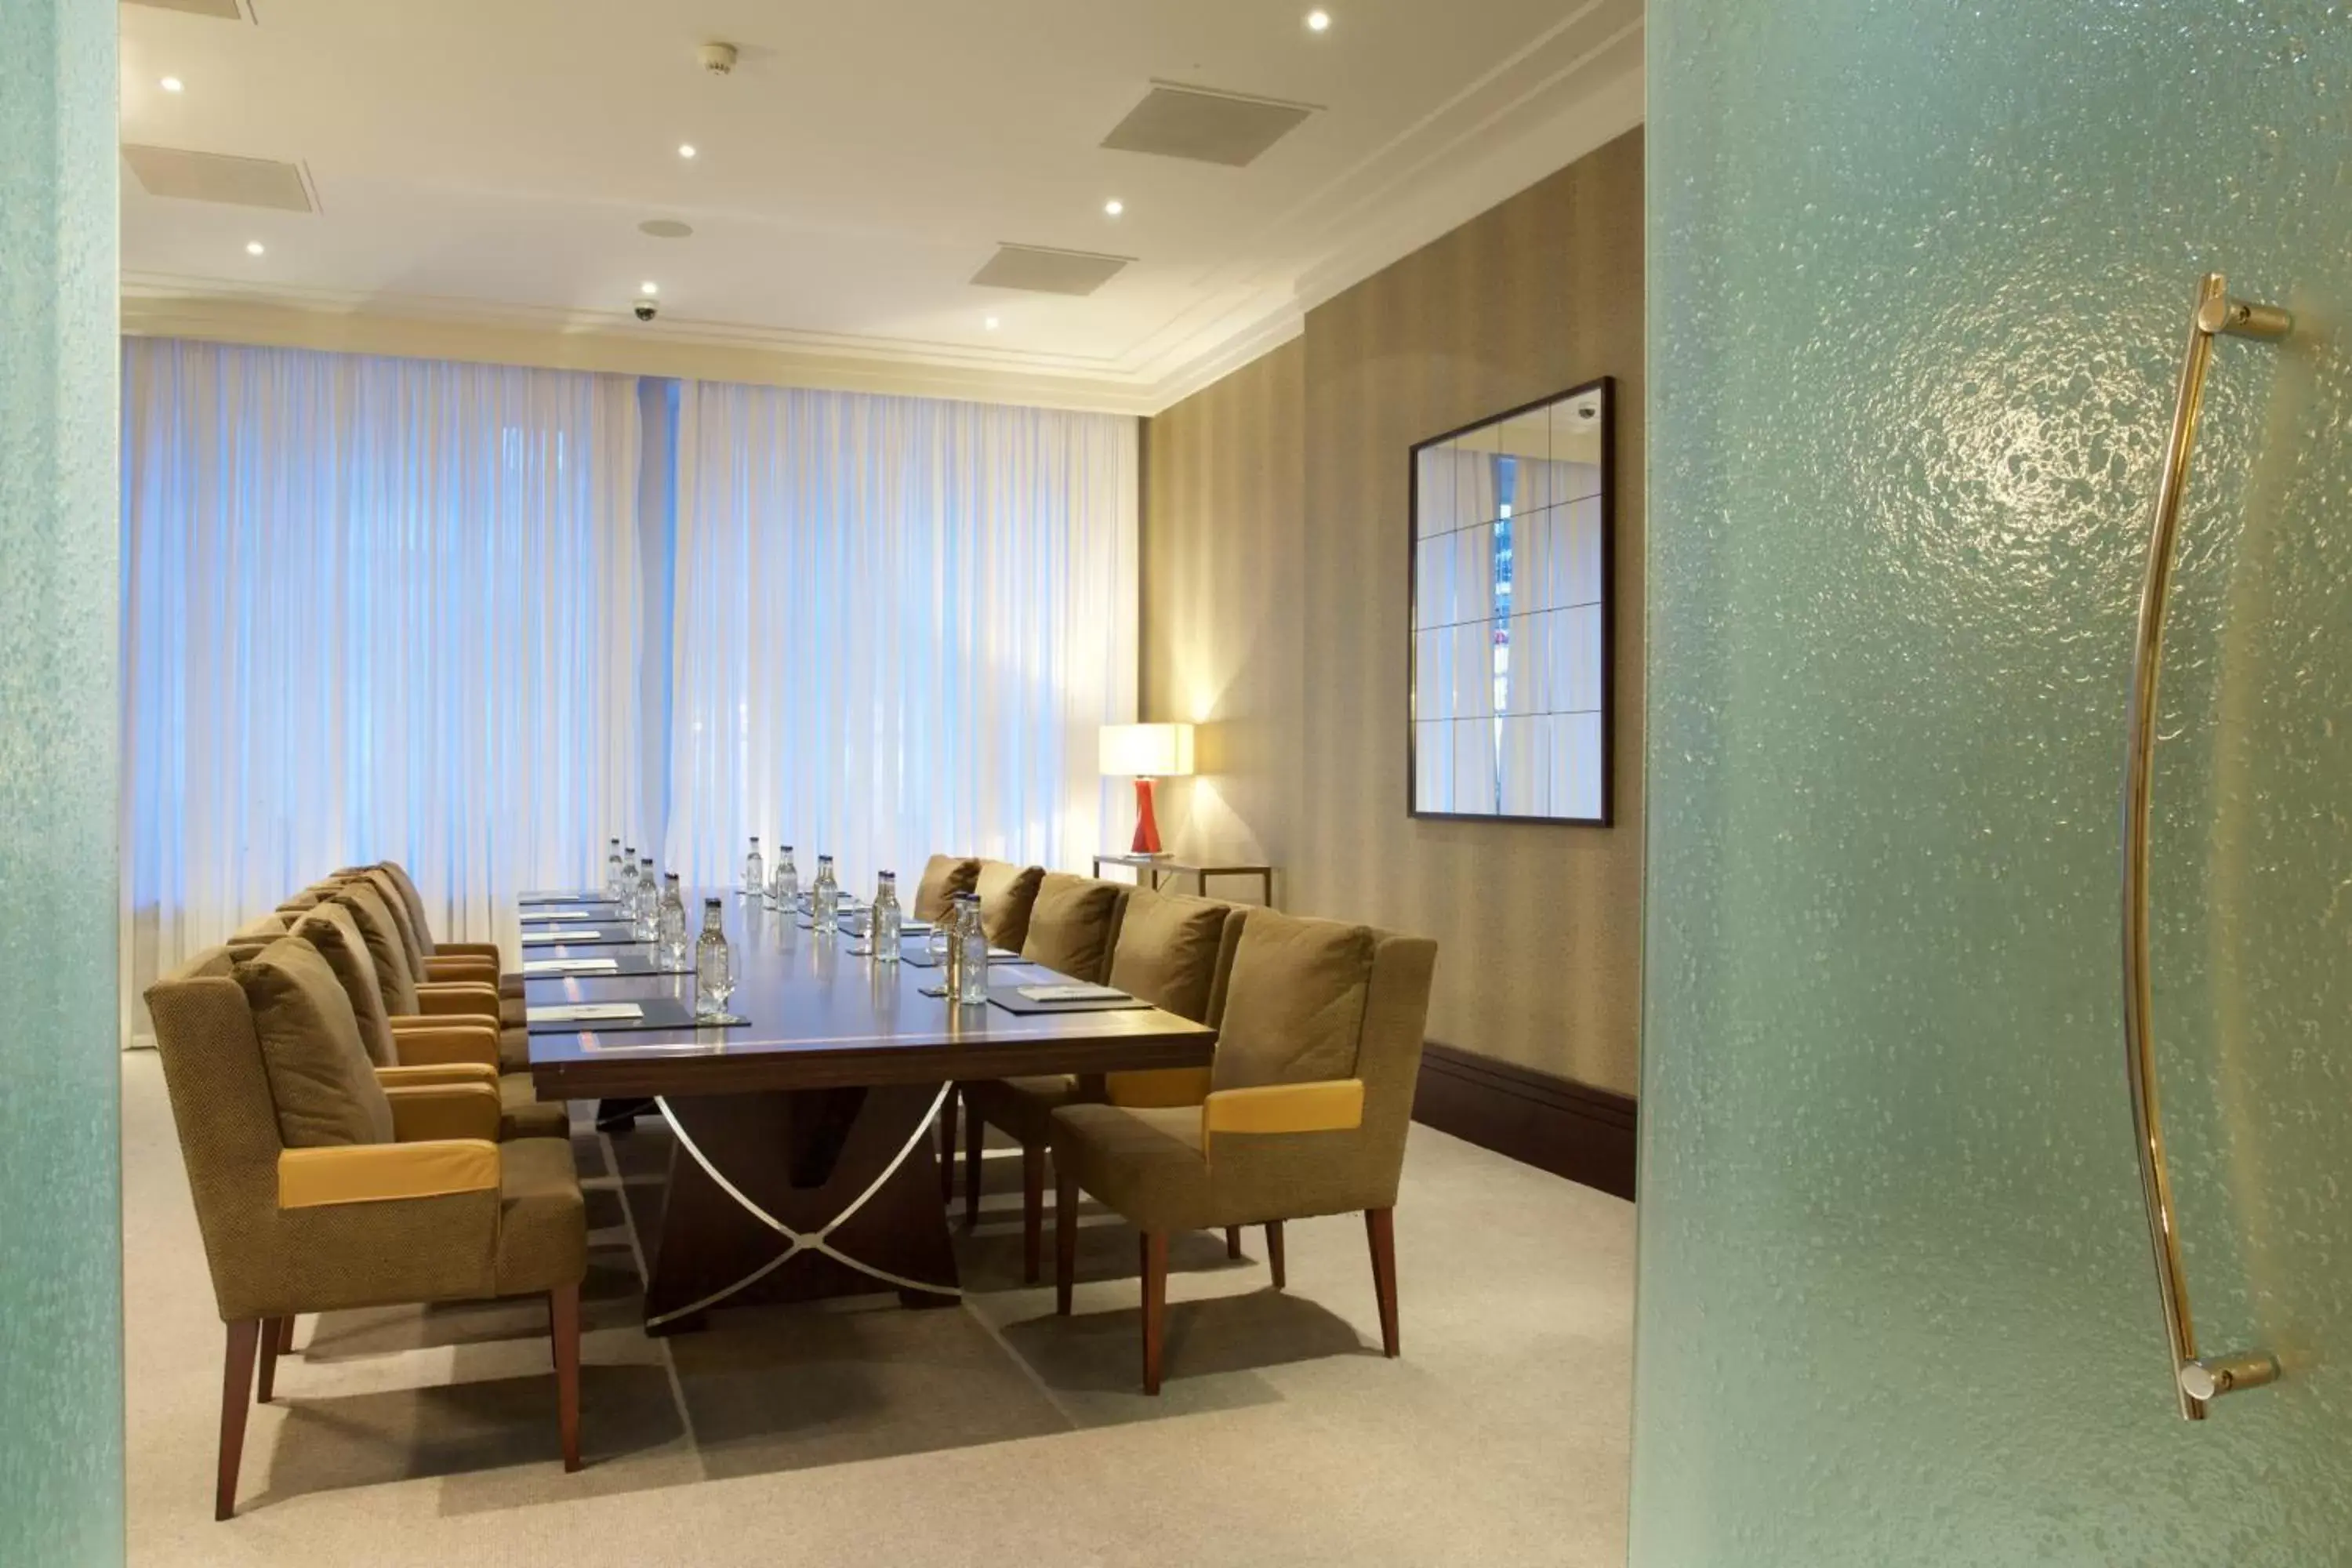 Meeting/conference room in The Chester Grosvenor